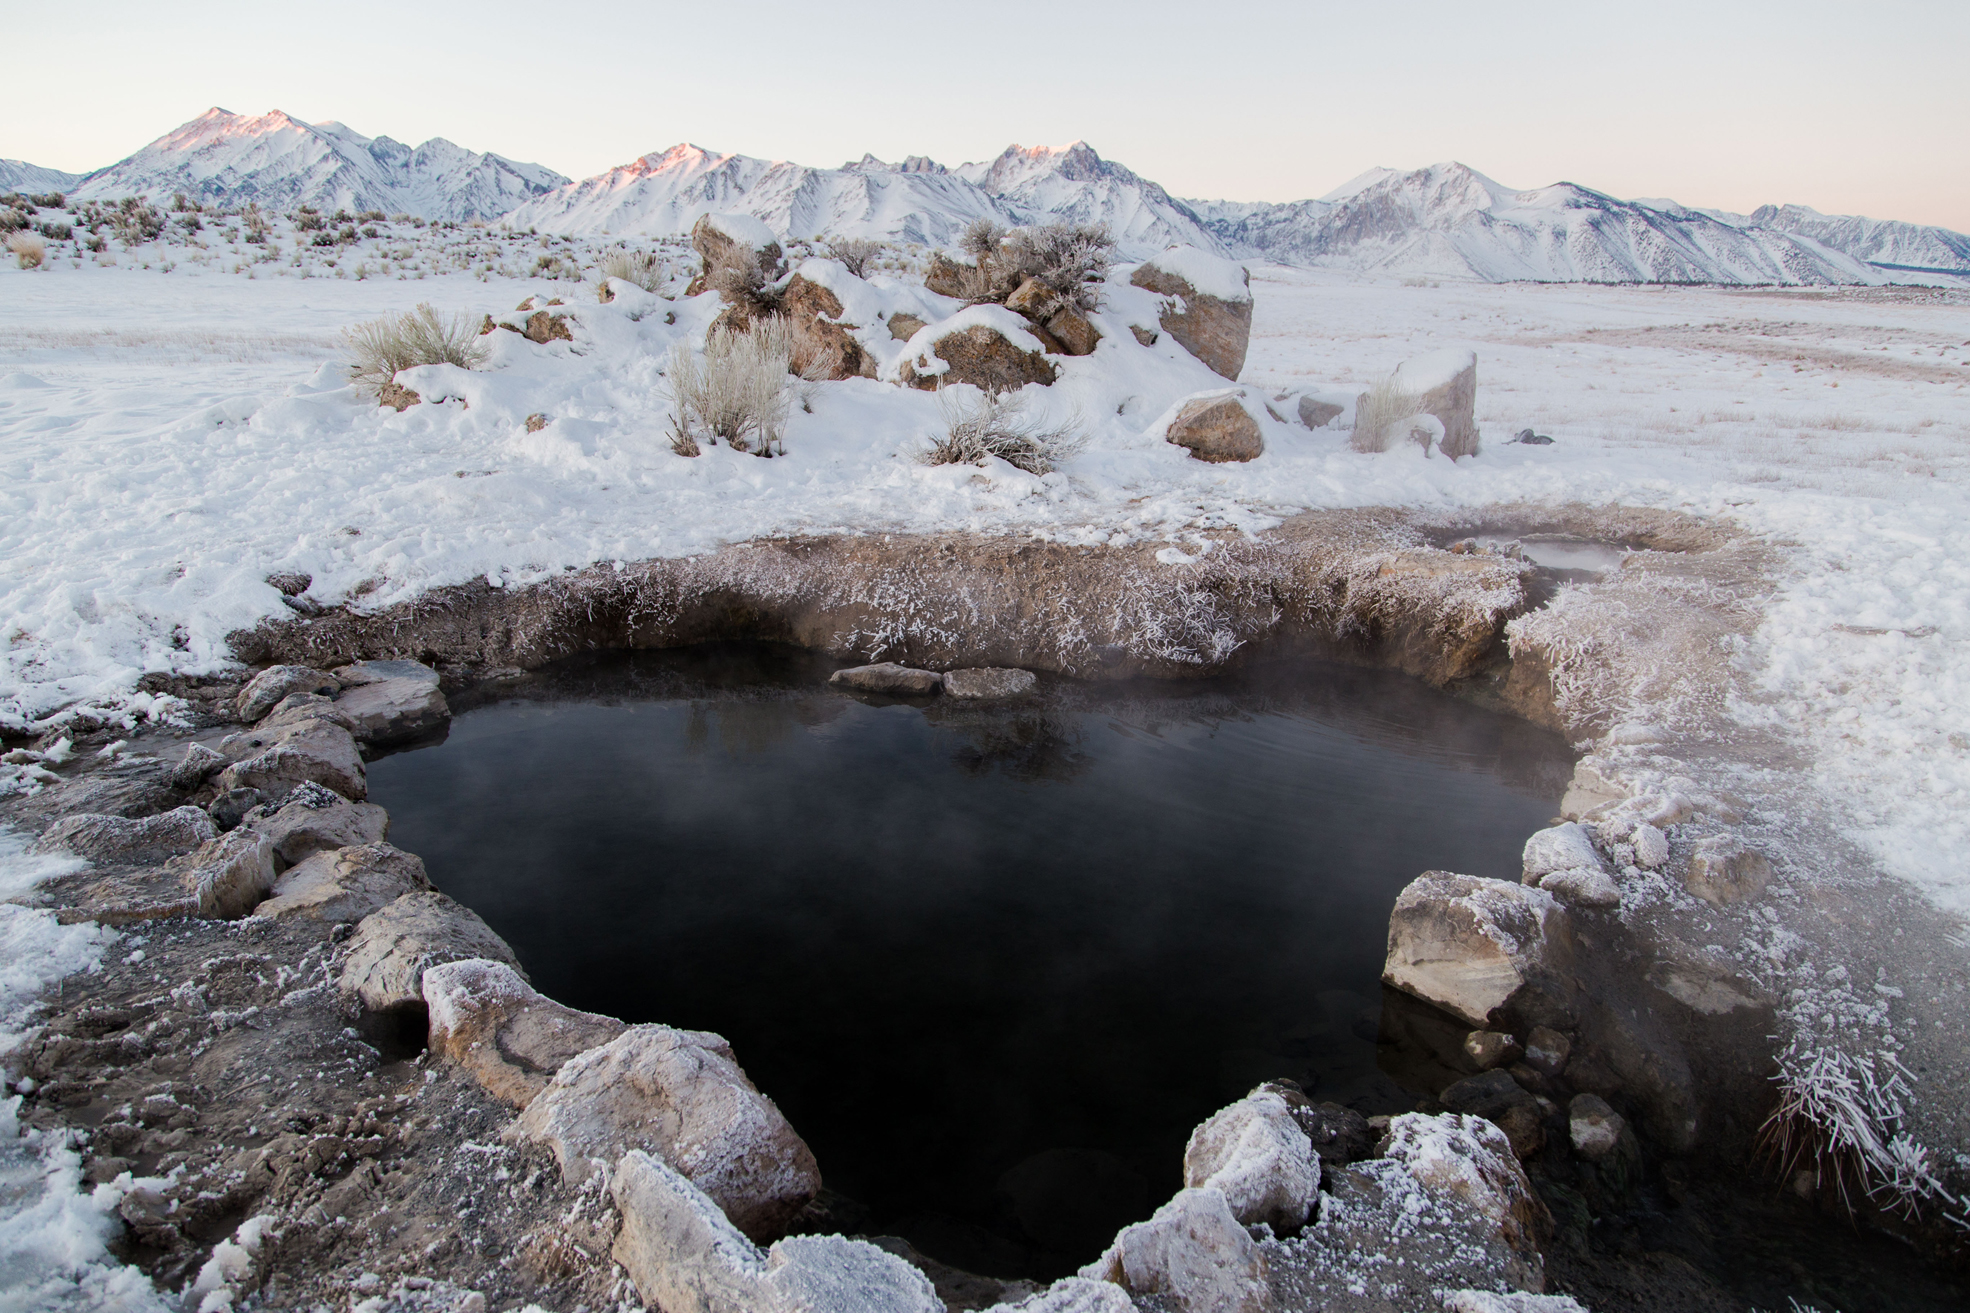 The Secret Hot Springs of Mammoth